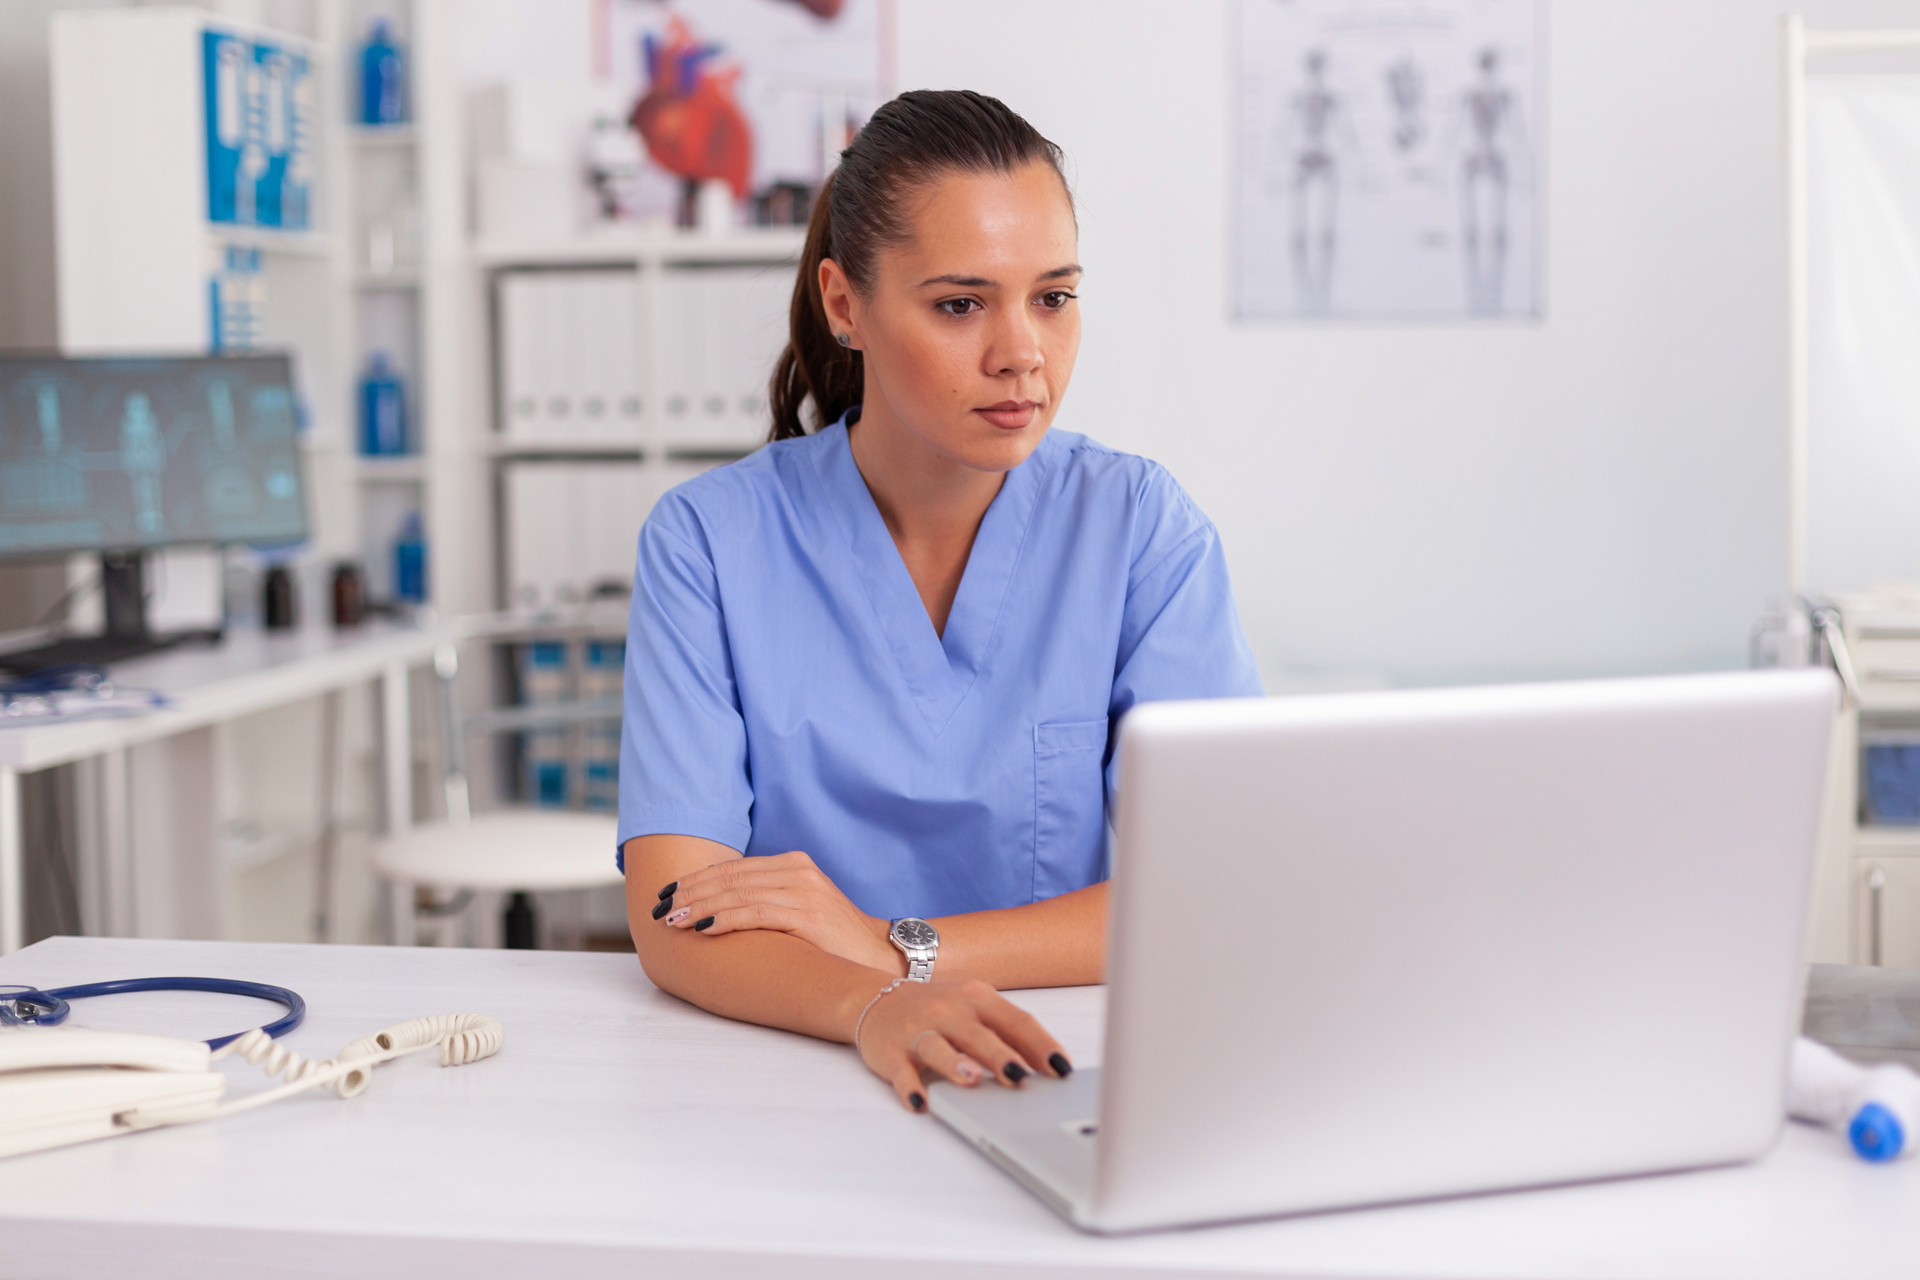 A nurse working on a laptop in a medical office with anatomy charts hanging on the wall in the background